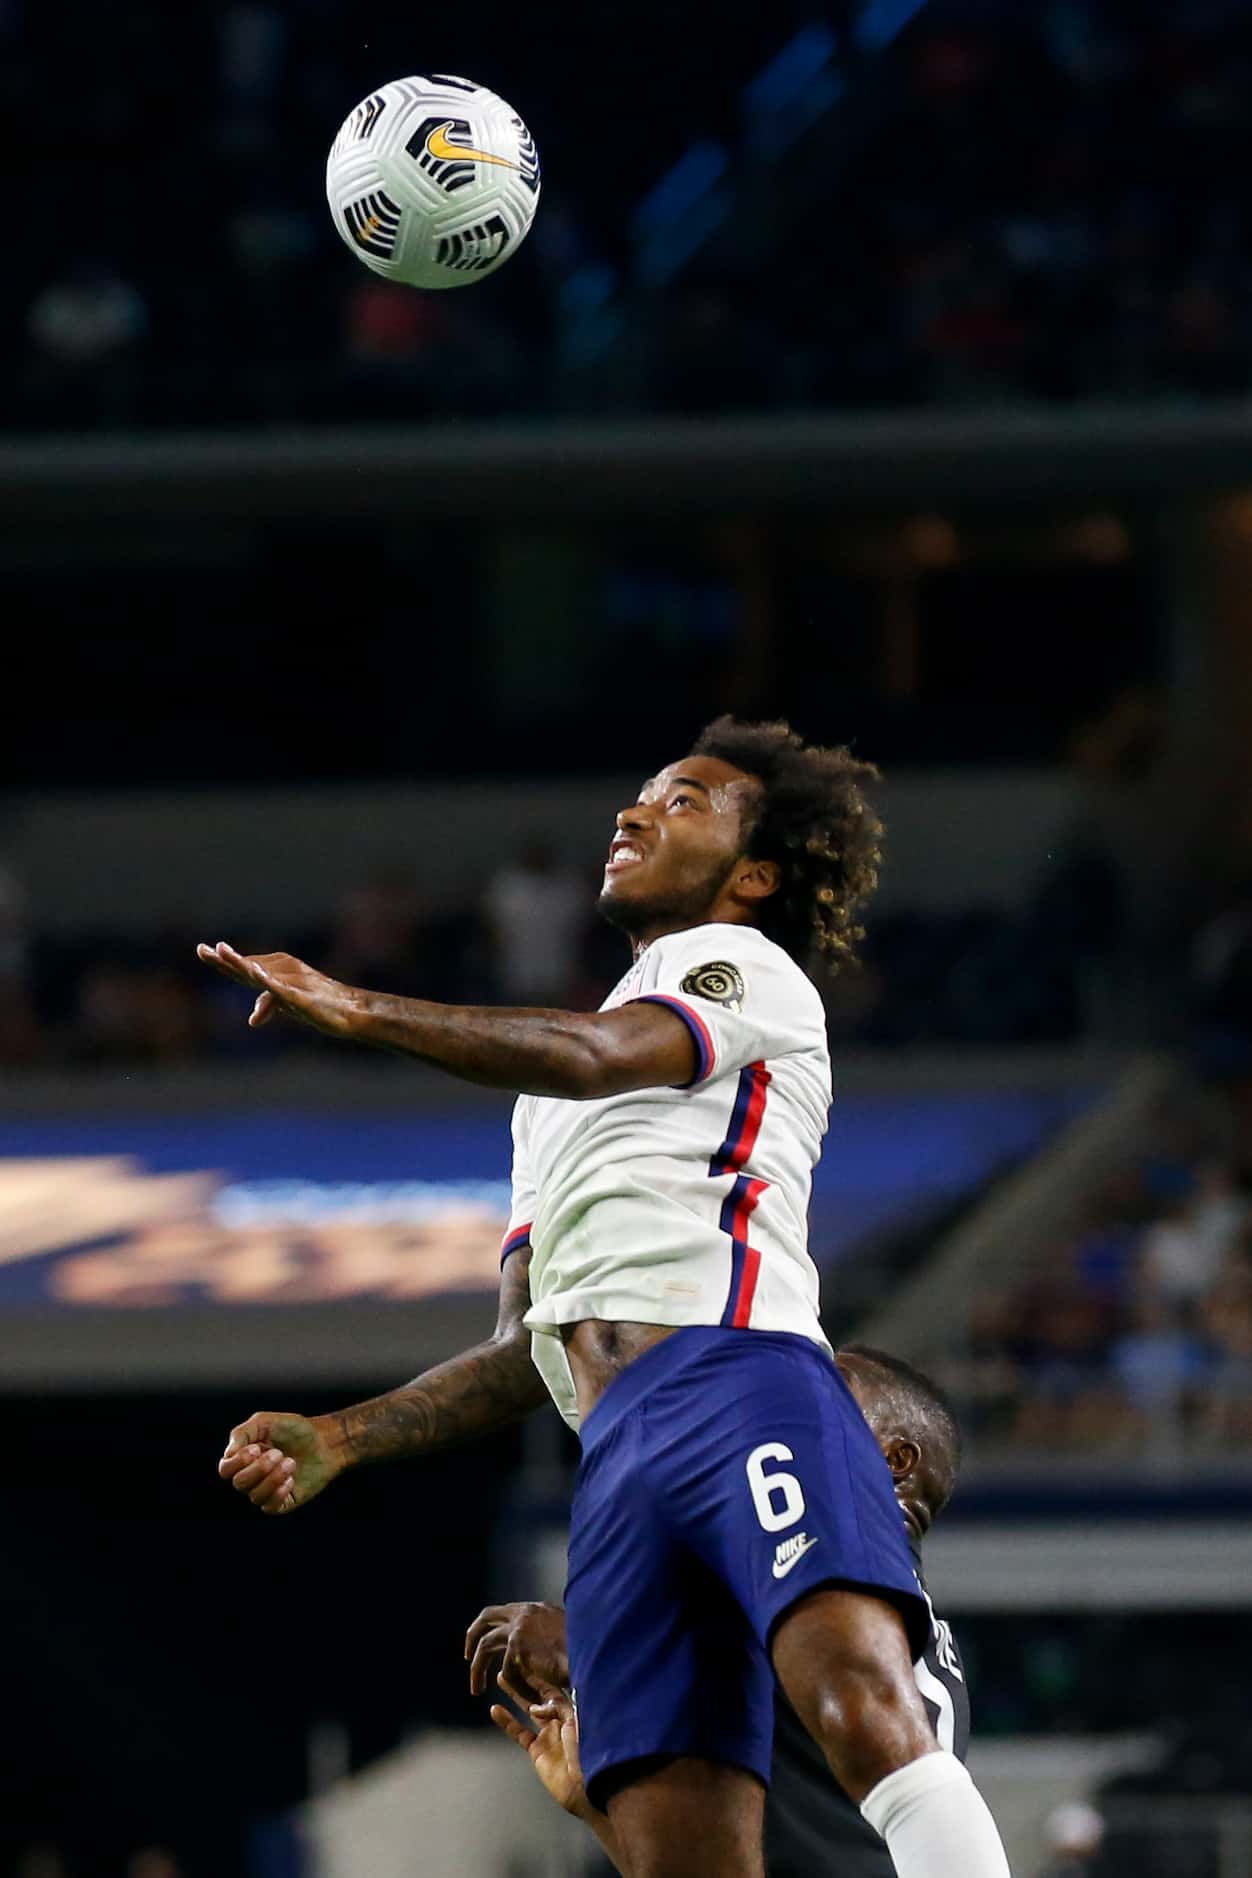 USA midfielder Gianluca Busio (6) leaps for a ball during the first half of a CONCACAF Gold...